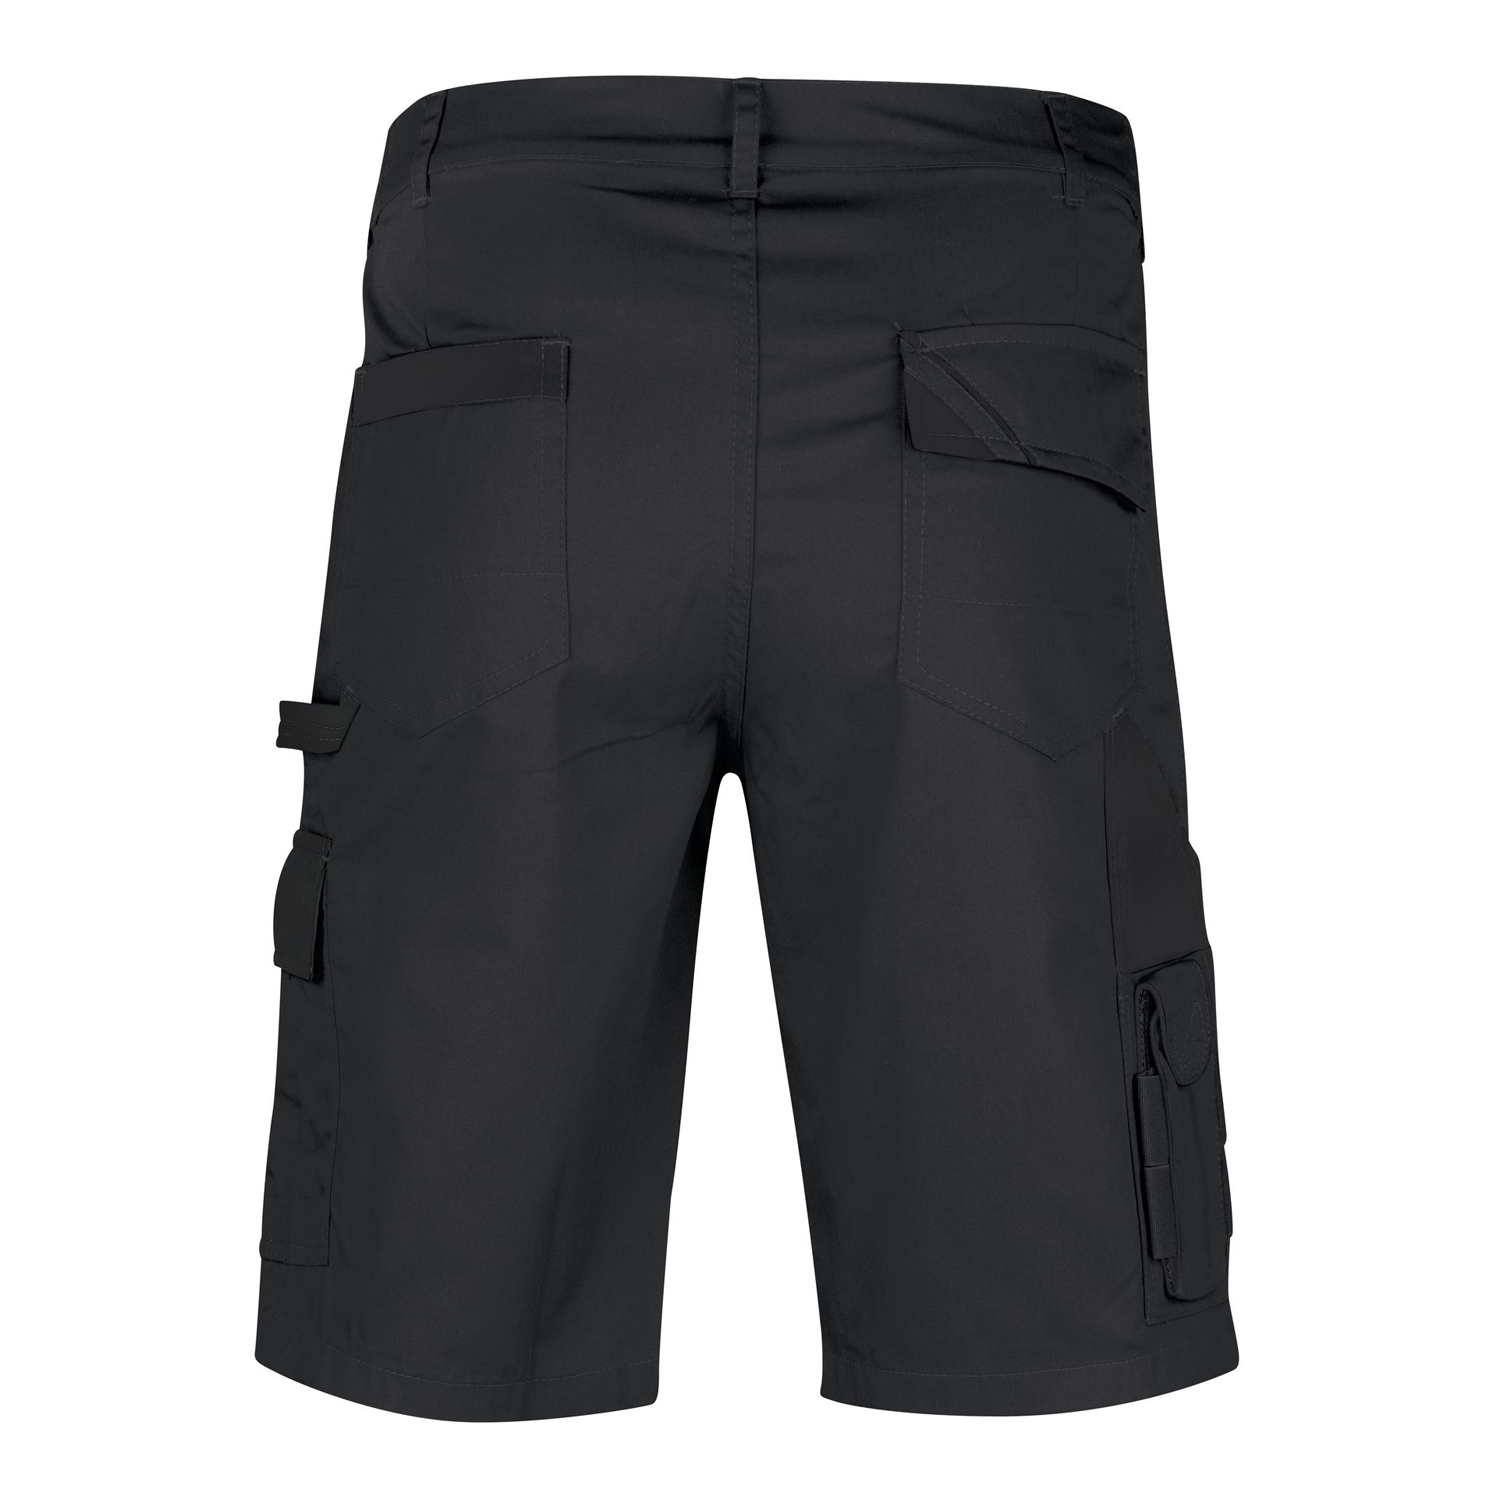 Workingshorts in black by PKA Klöcker, large sizes up to 66